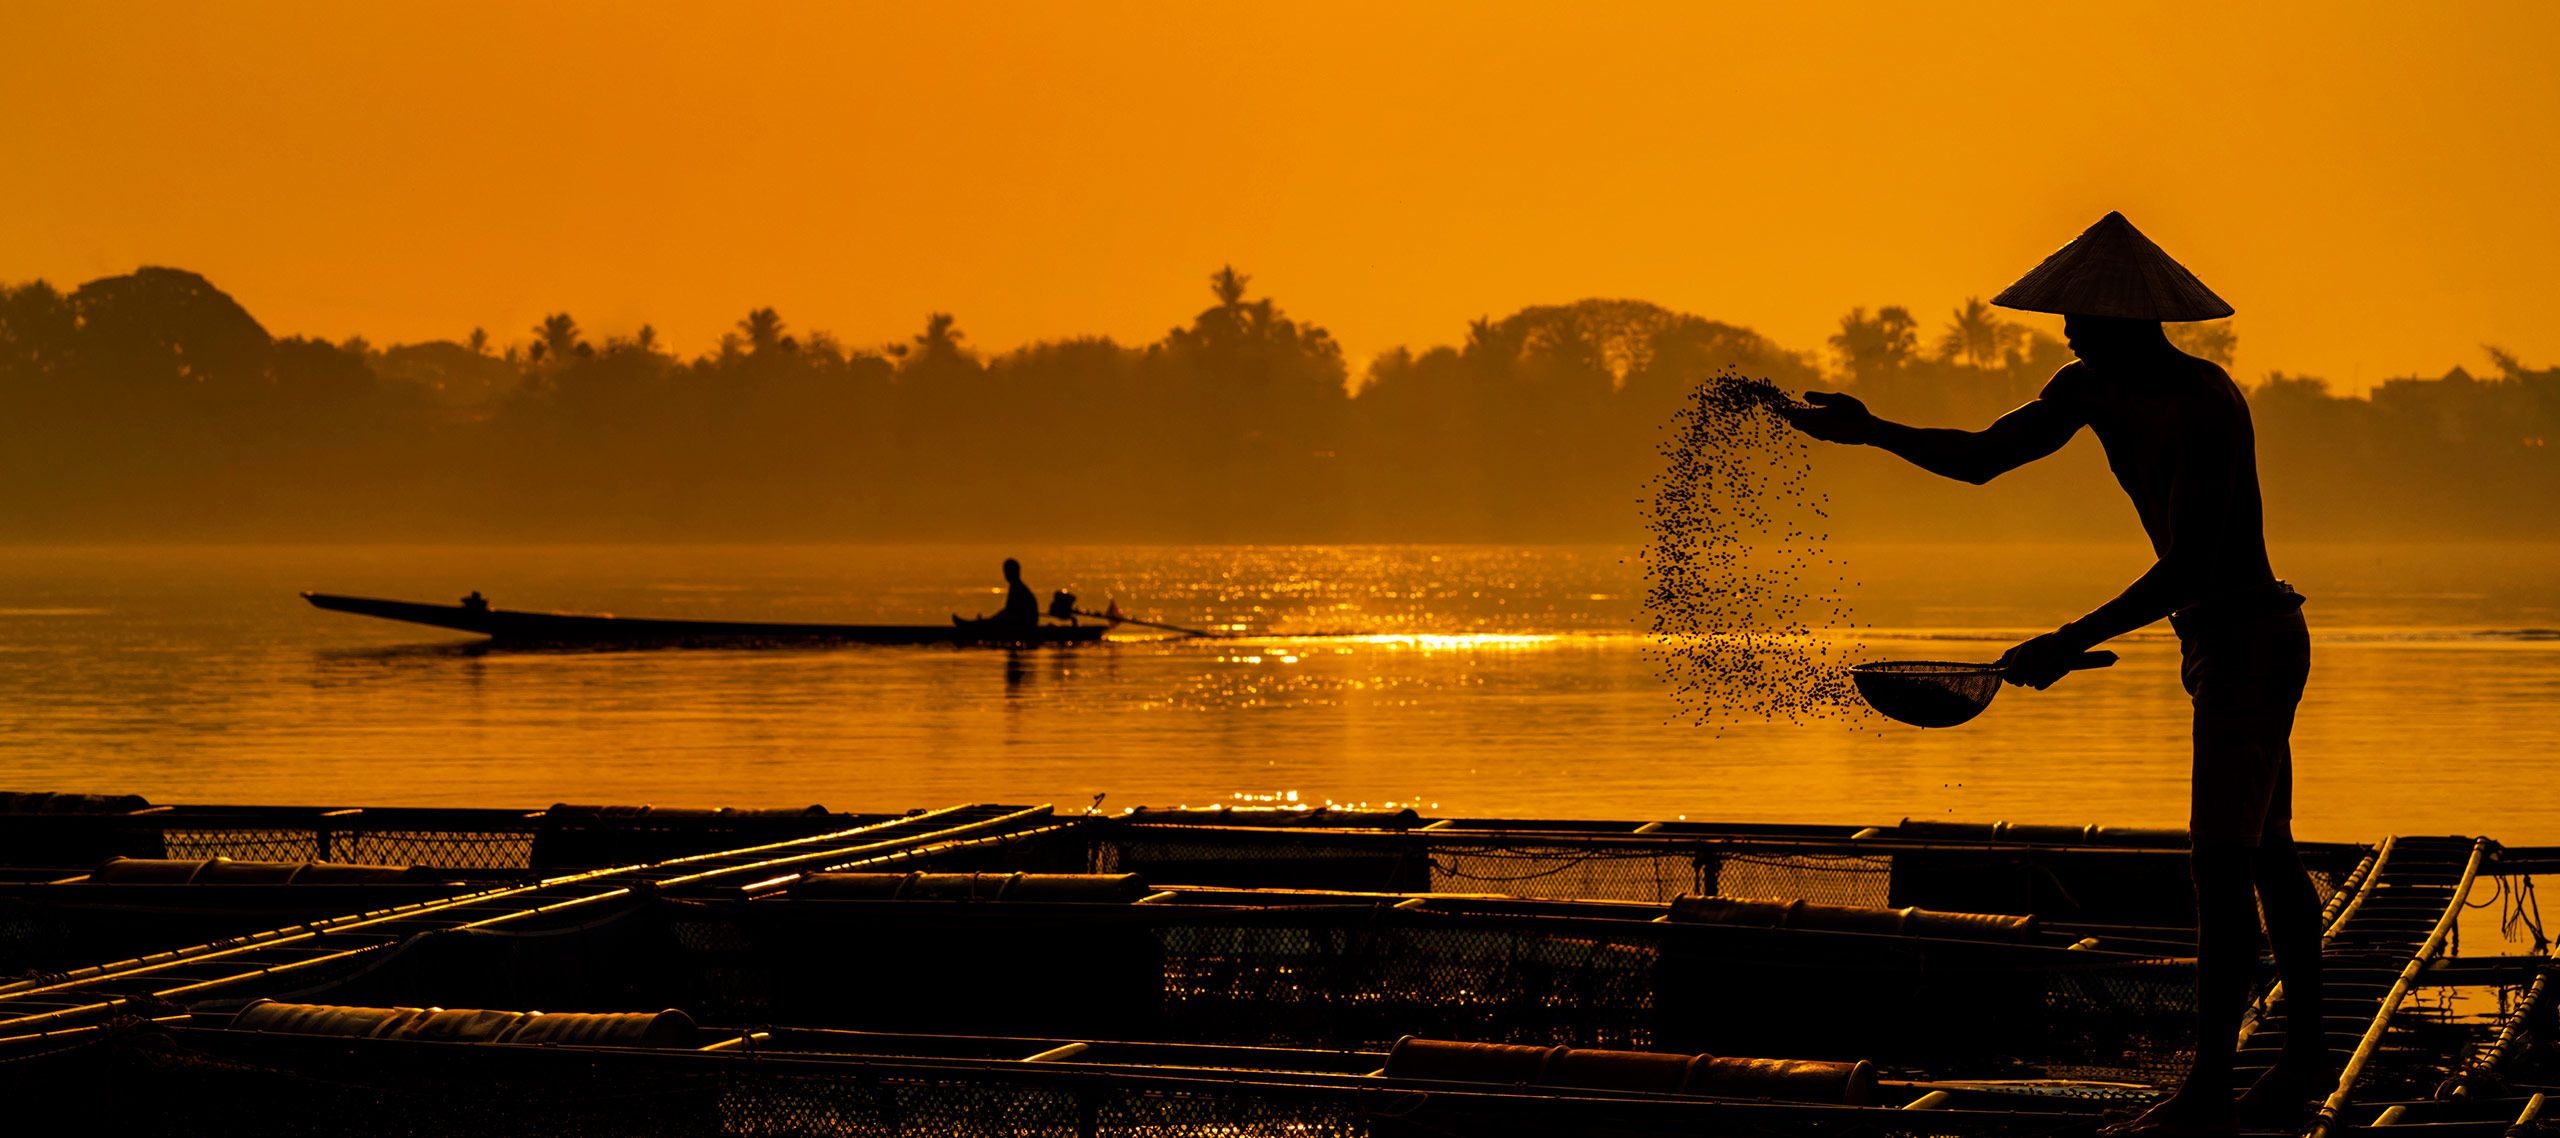 A fisherman feeds fish at a commercial farm in Mekong River.